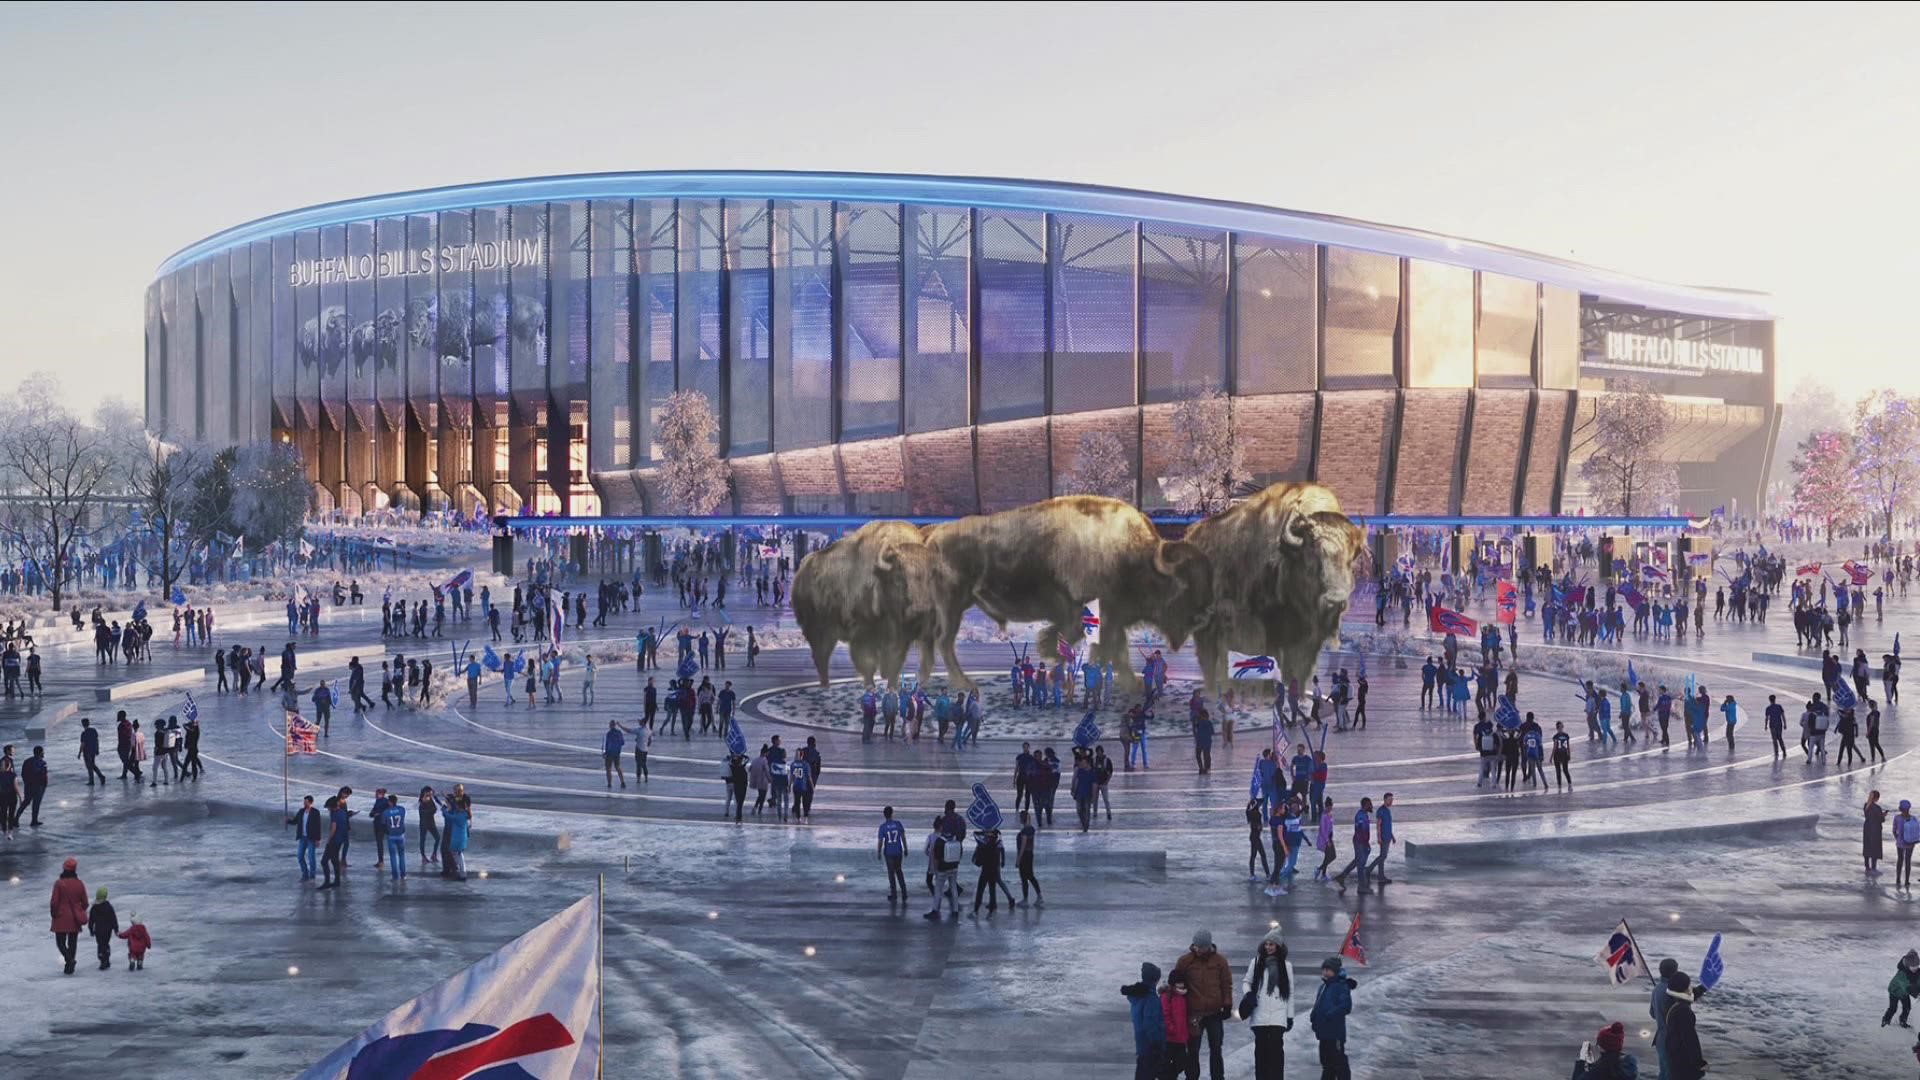 On Thursday, the Buffalo Bills shared new renderings of the future stadium that will be located across Abbott Road from their current one.